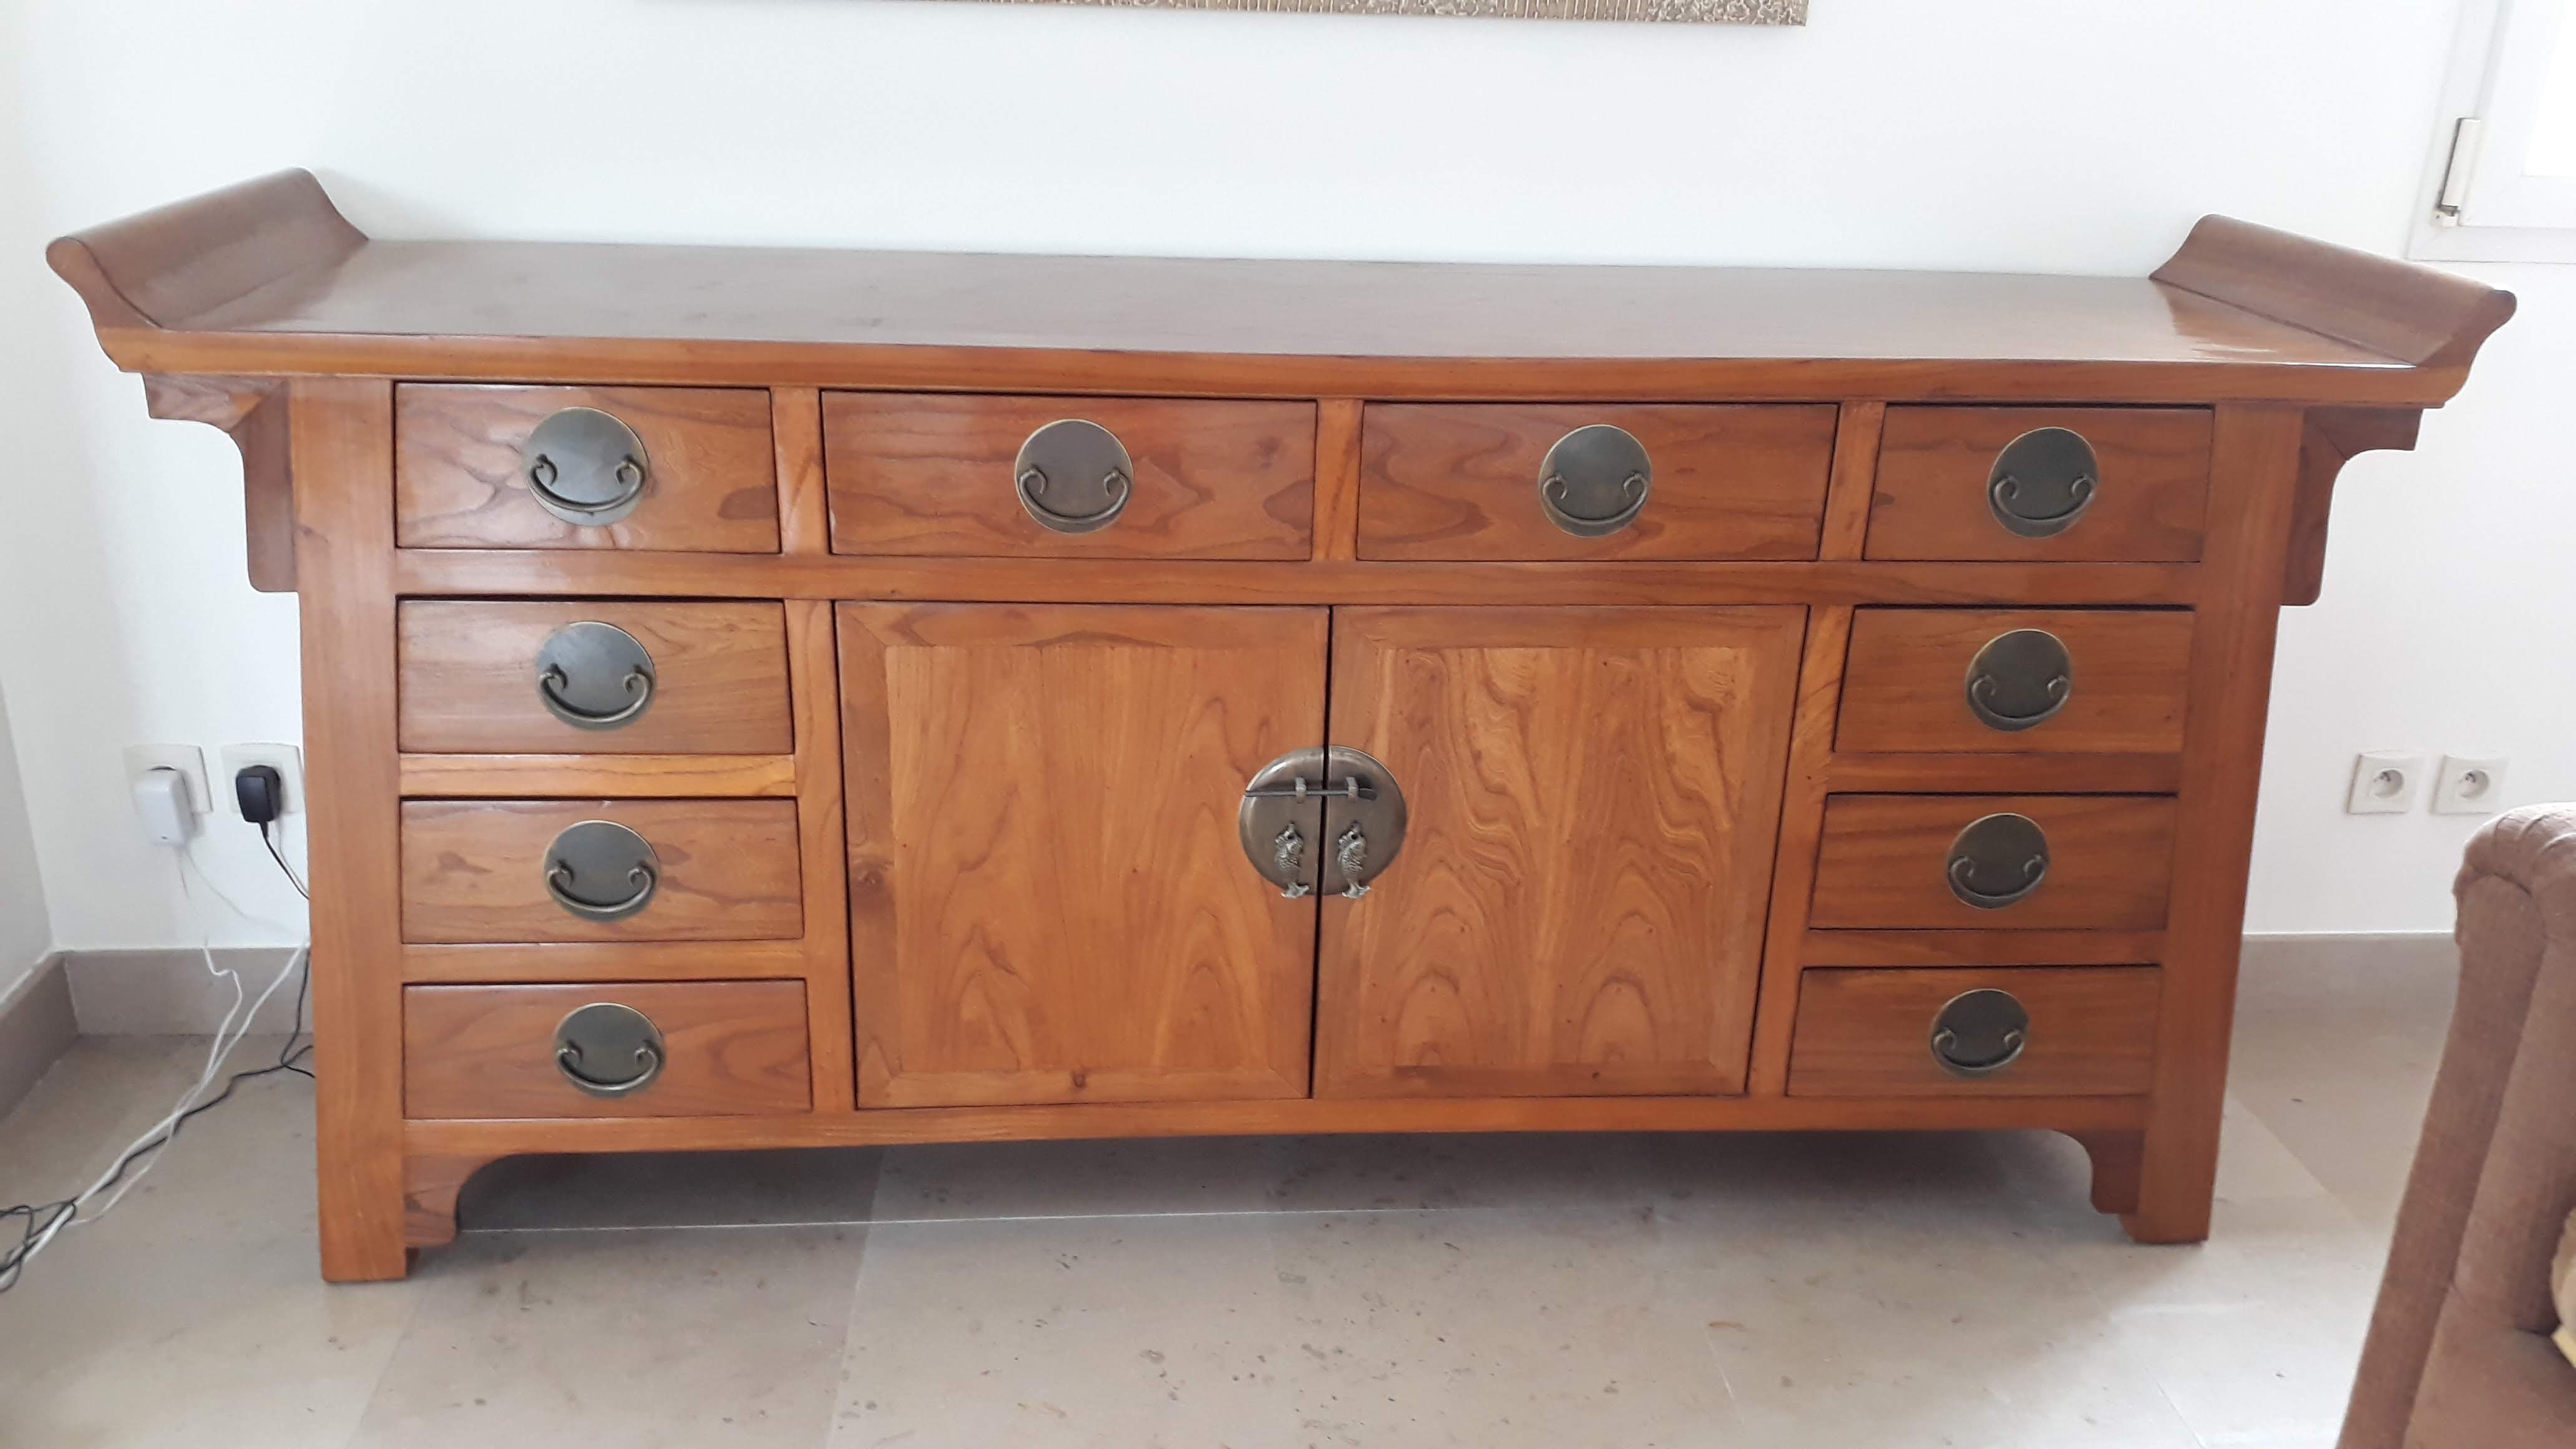 A beautiful Teak Chinese Sideboard with brass handles - Image 3 of 3